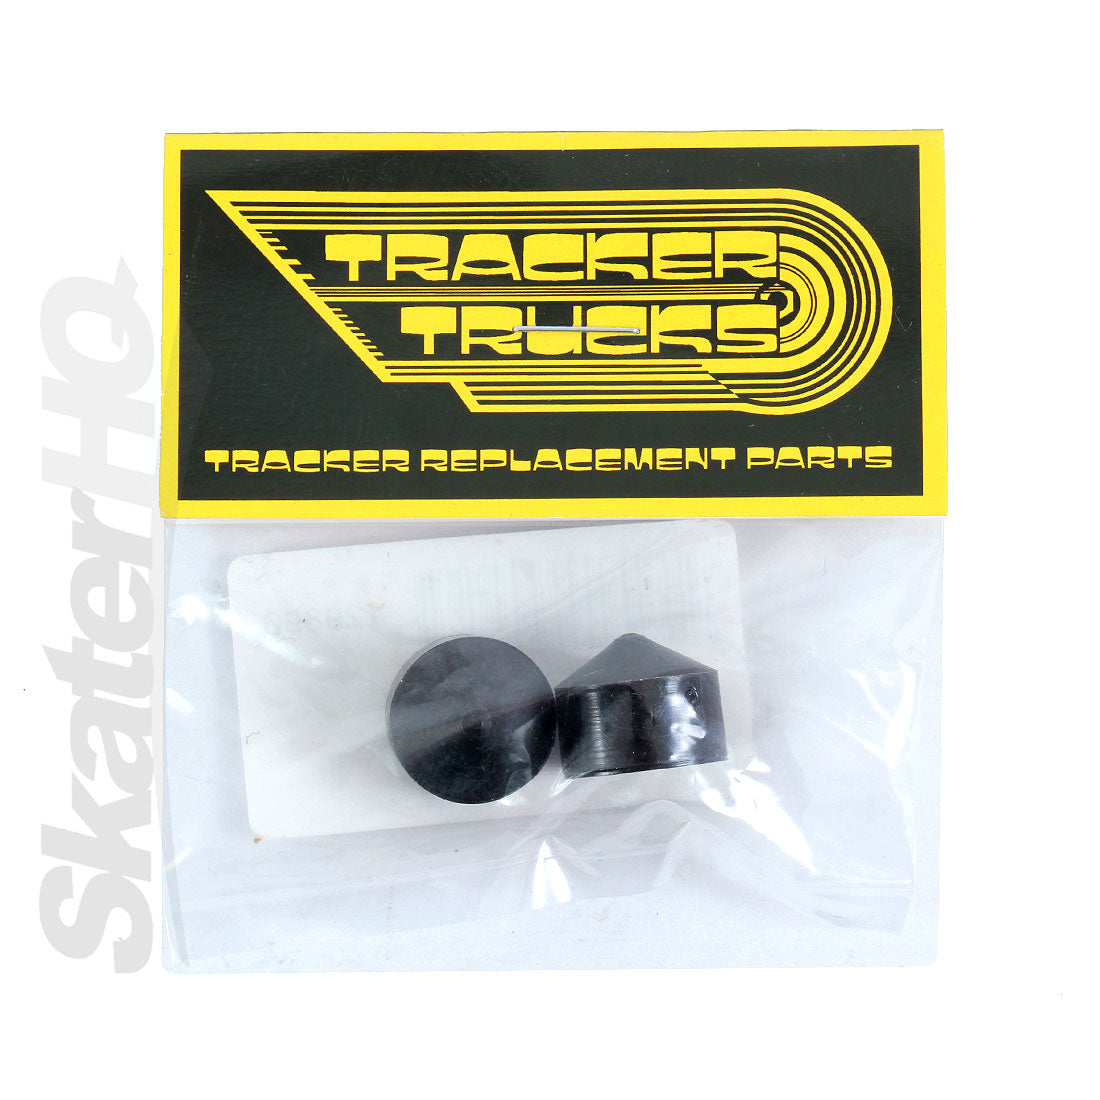 Tracker Pivot Cups Skateboard Hardware and Parts